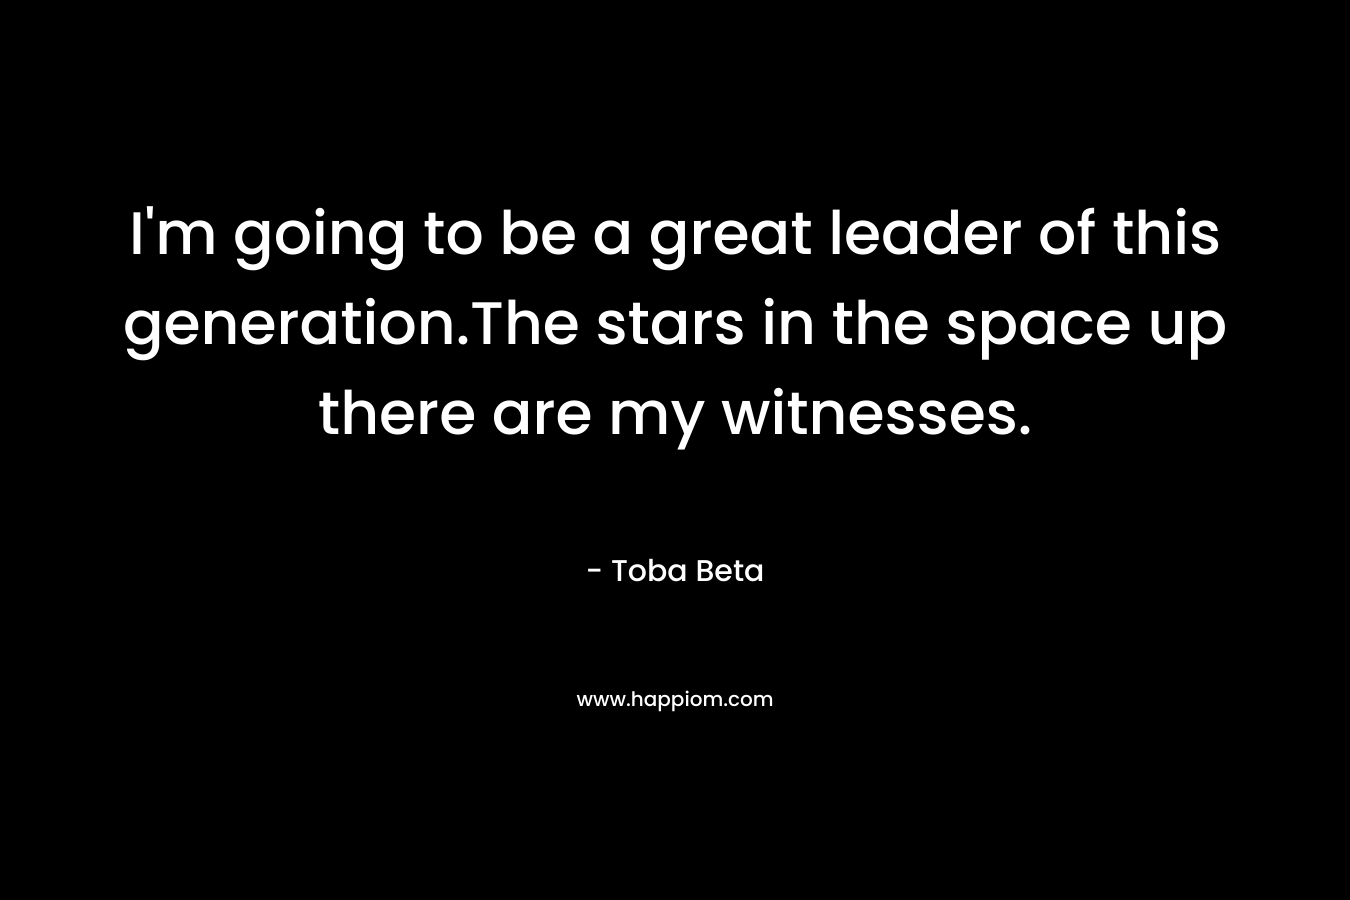 I'm going to be a great leader of this generation.The stars in the space up there are my witnesses.